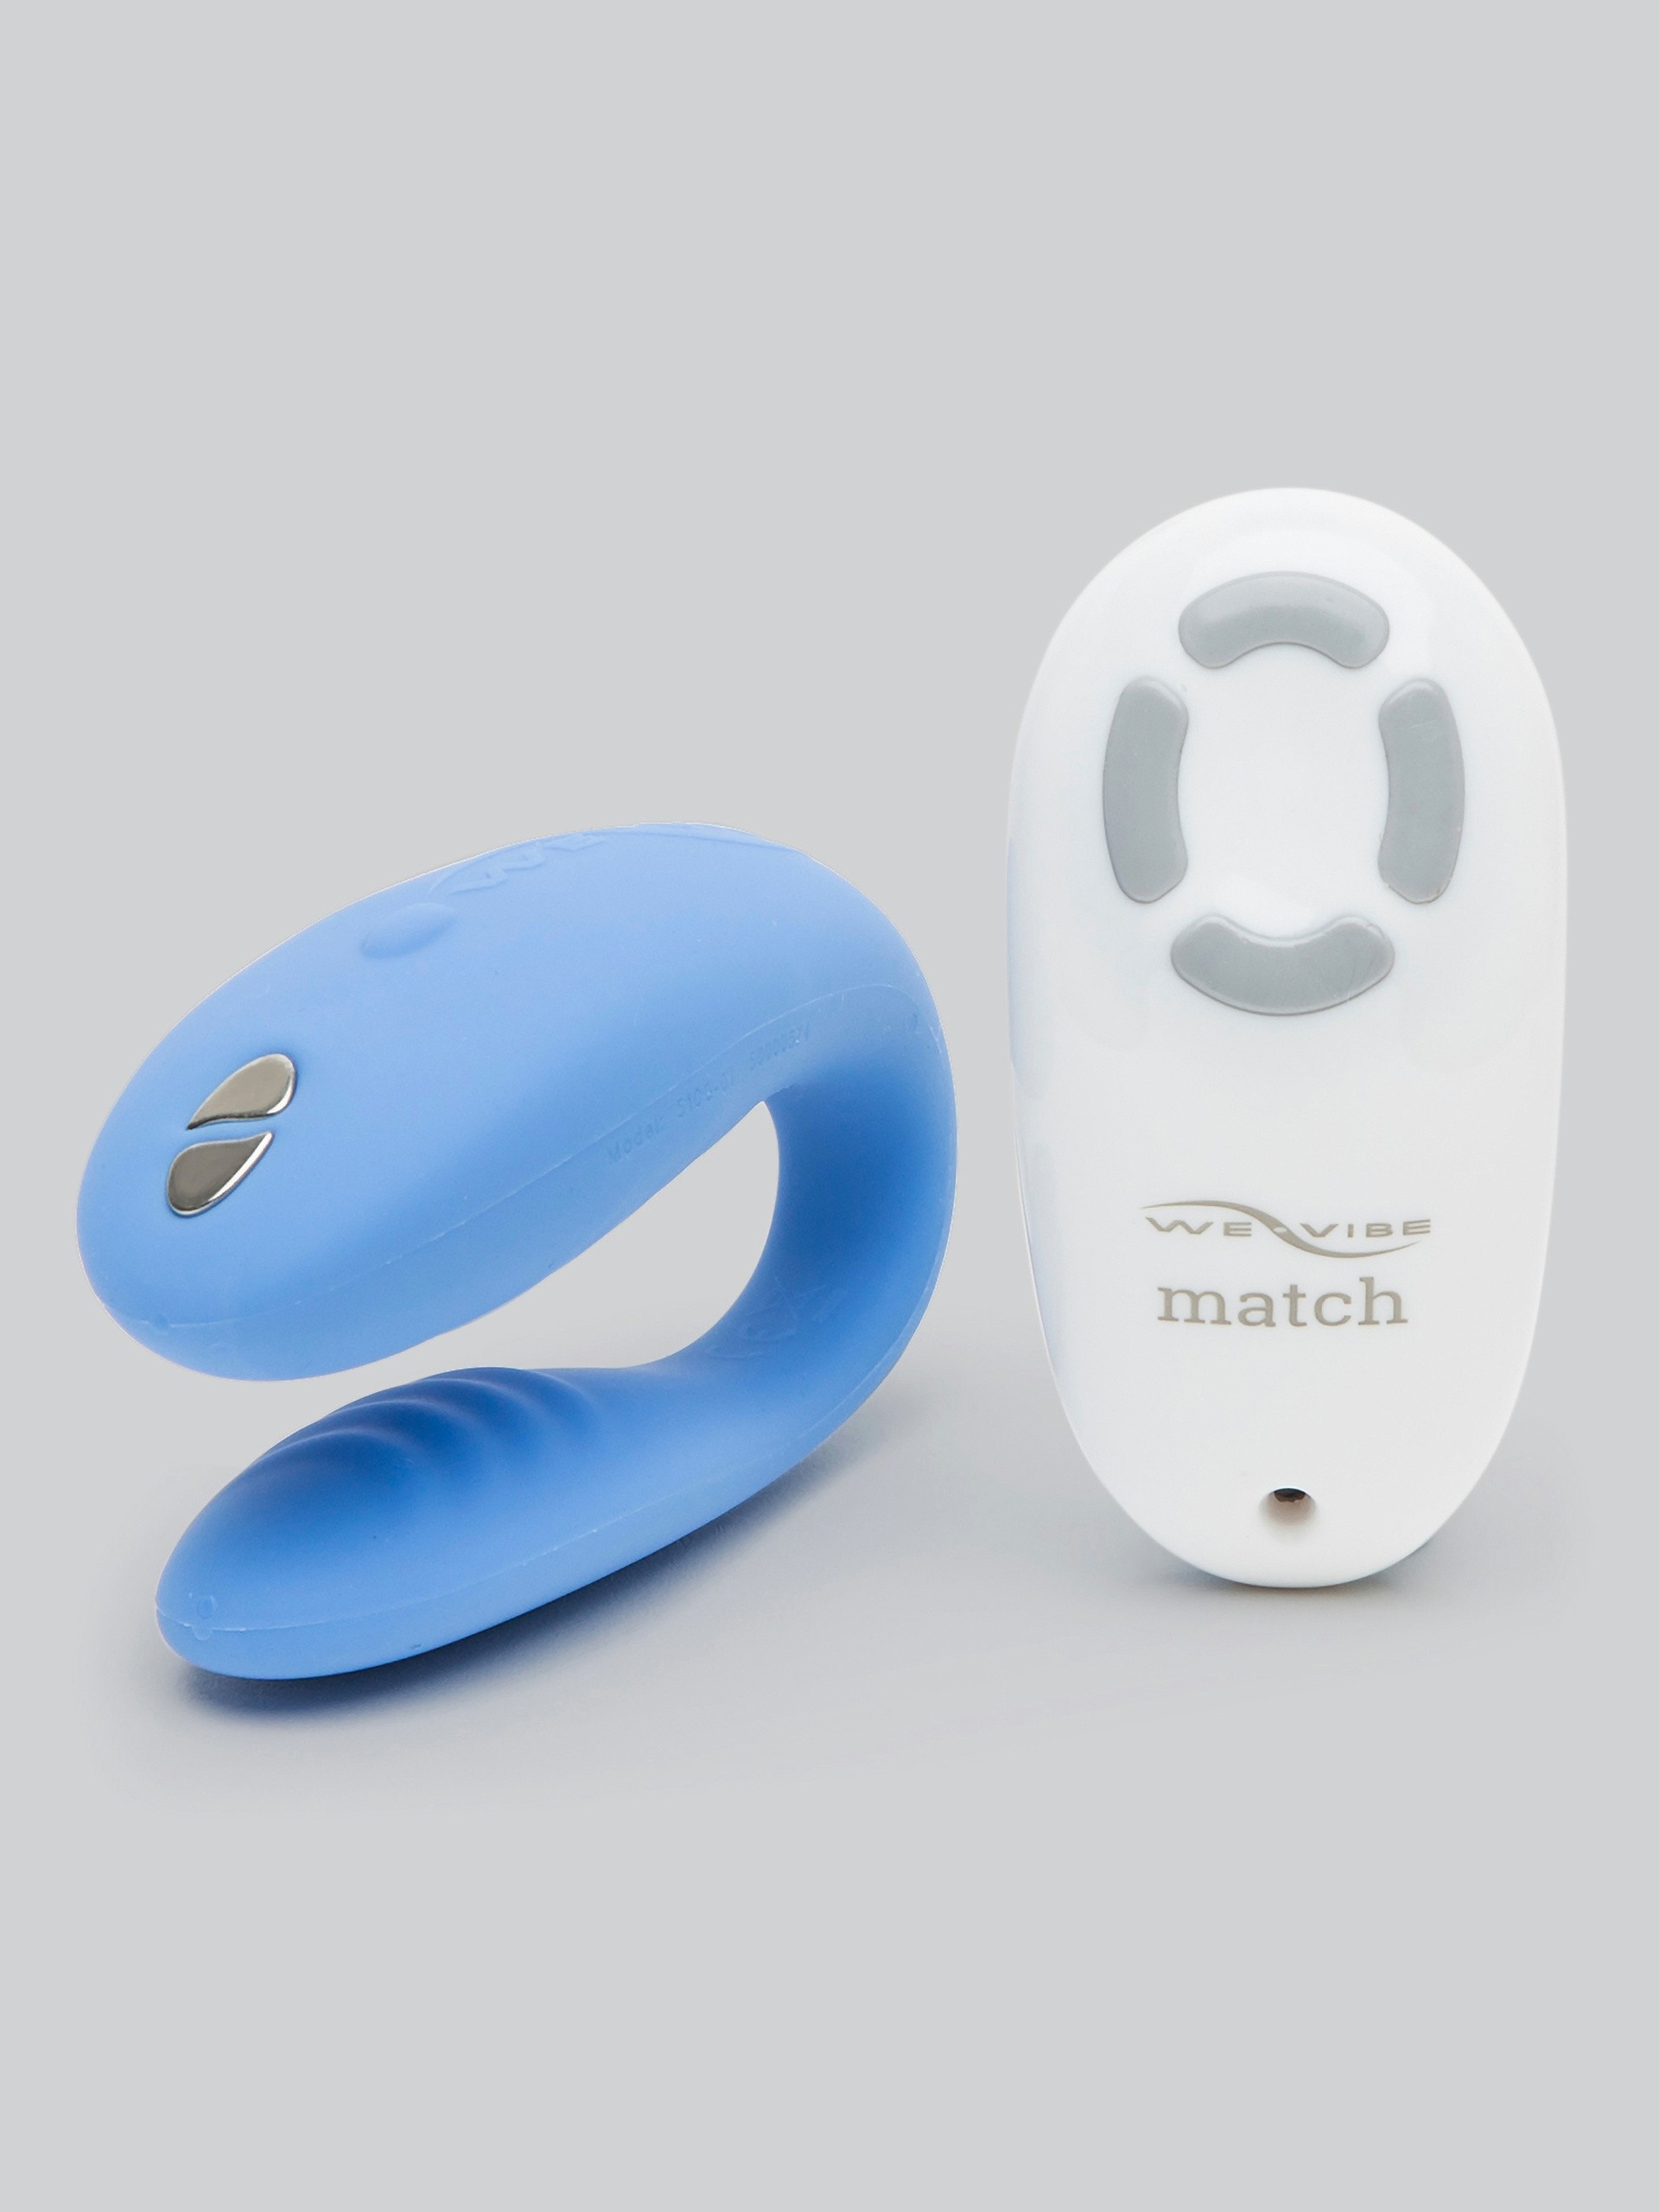 We-Vibe Match Remote Control Wearable Couple's Vibrator  - Blue